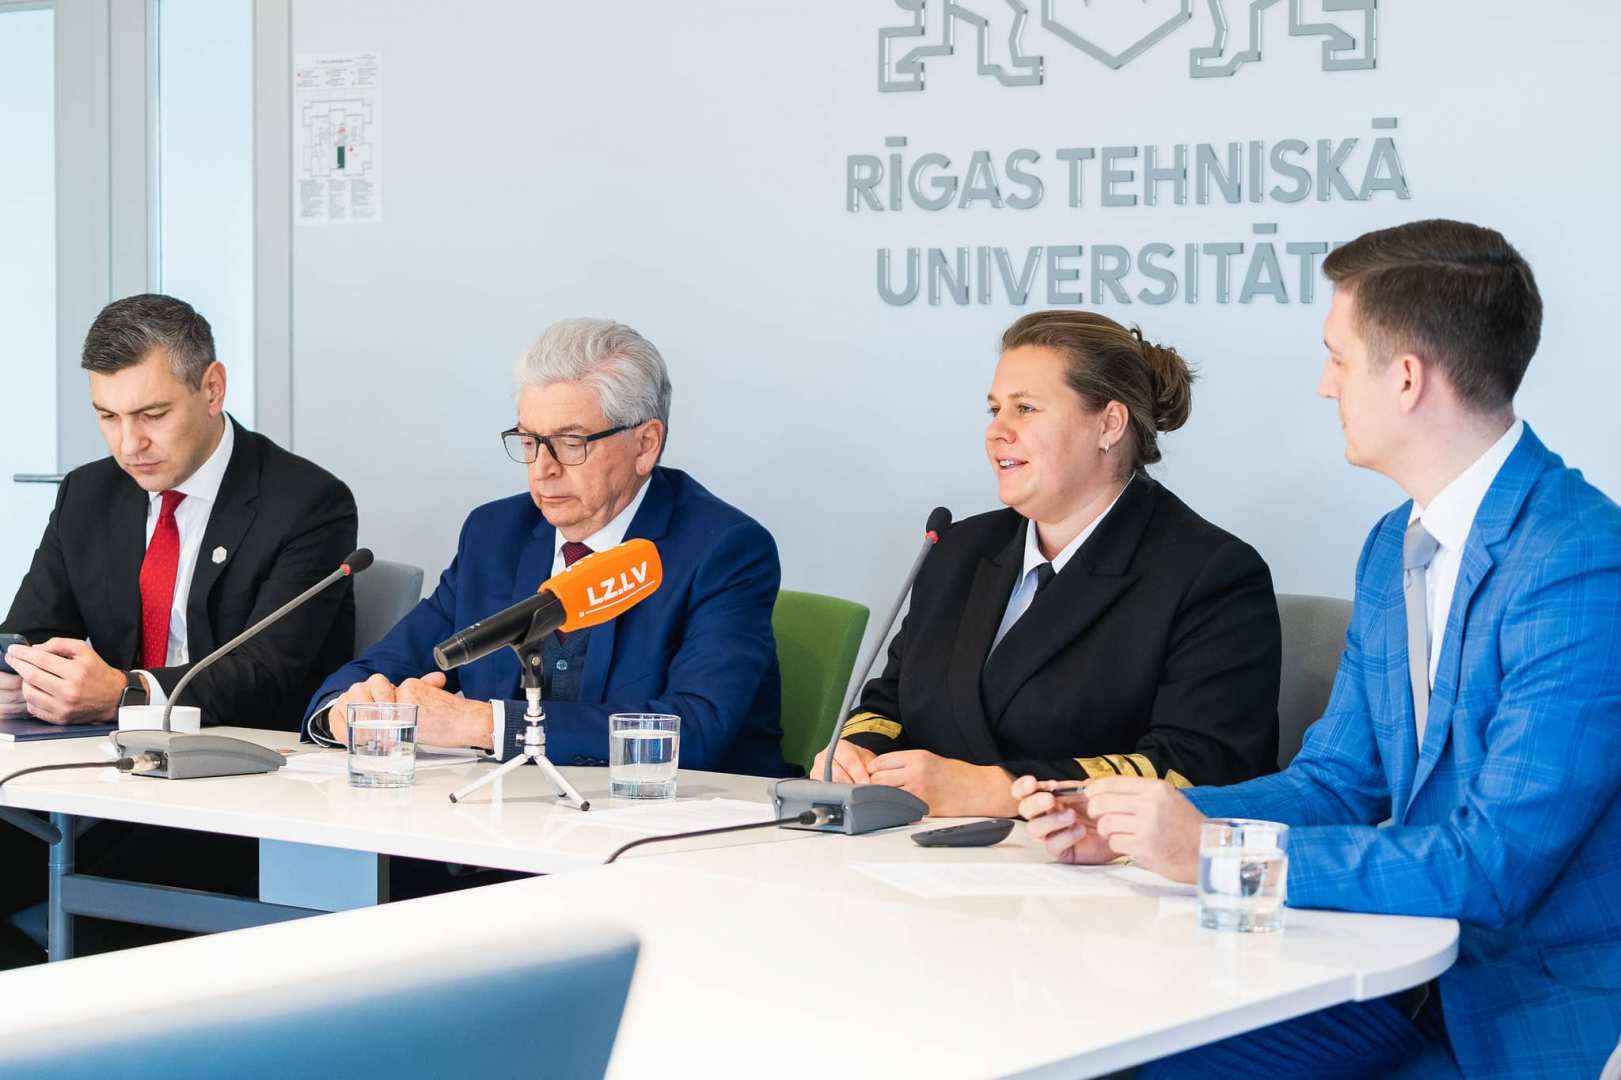 With the integration into RTU, Latvian Maritime Academy (LMA) will be provided an opportunity to strengthen its studies and research and develop its infrastructure